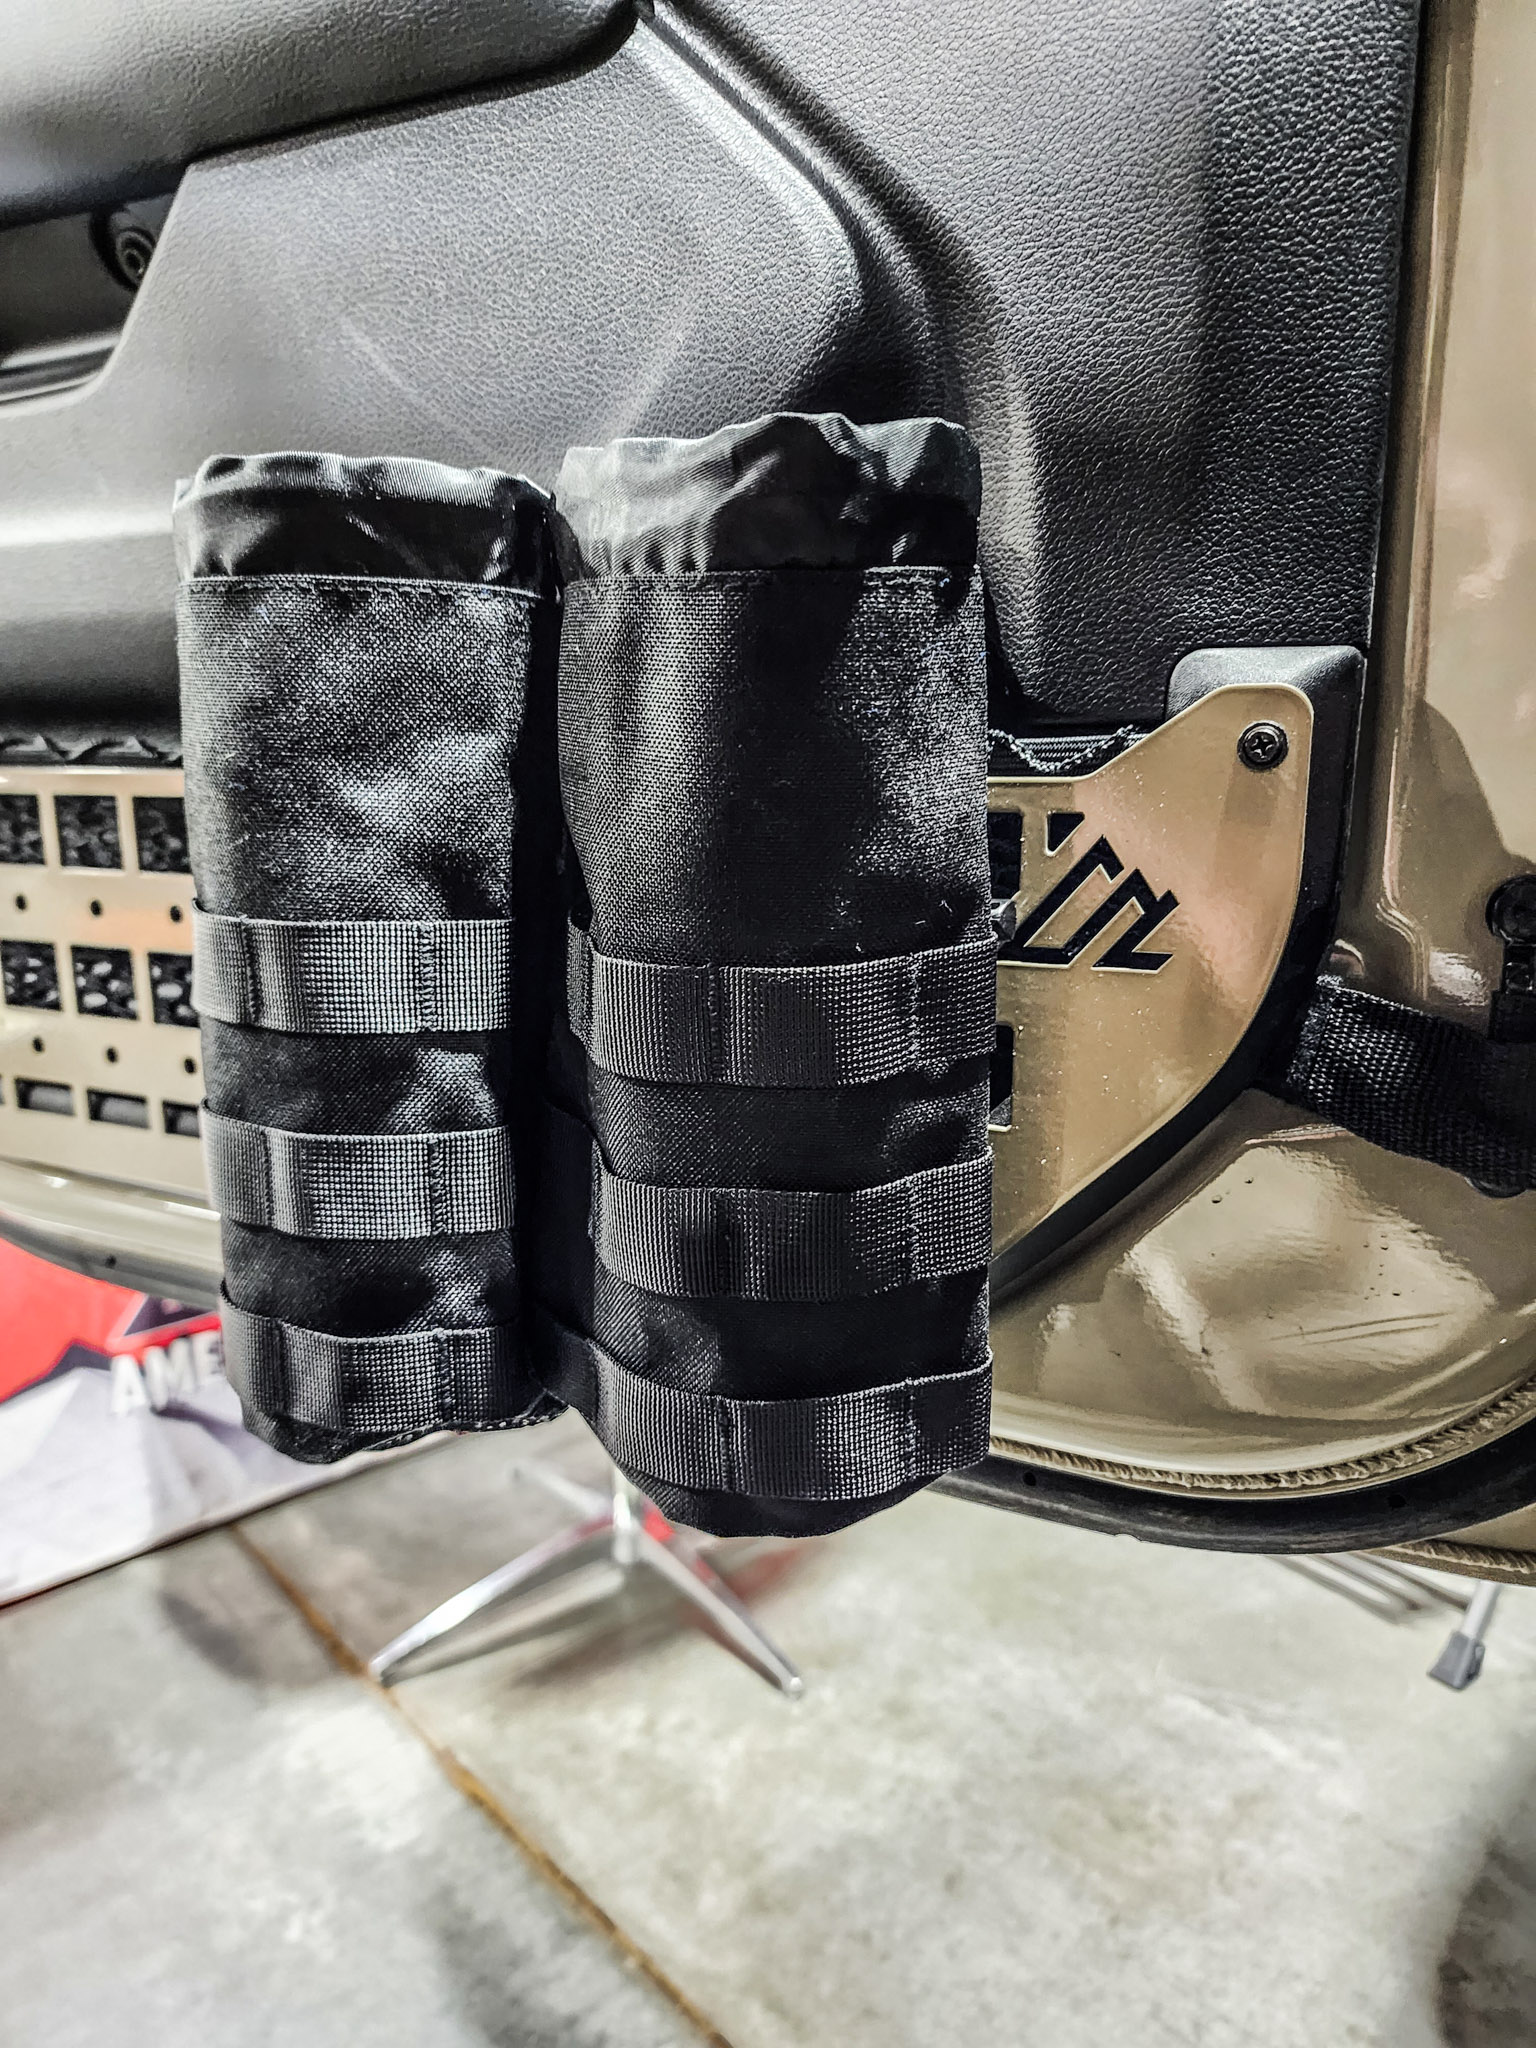 MOLLE Pouch - Cup/Bottle Holder - American Adventure Lab